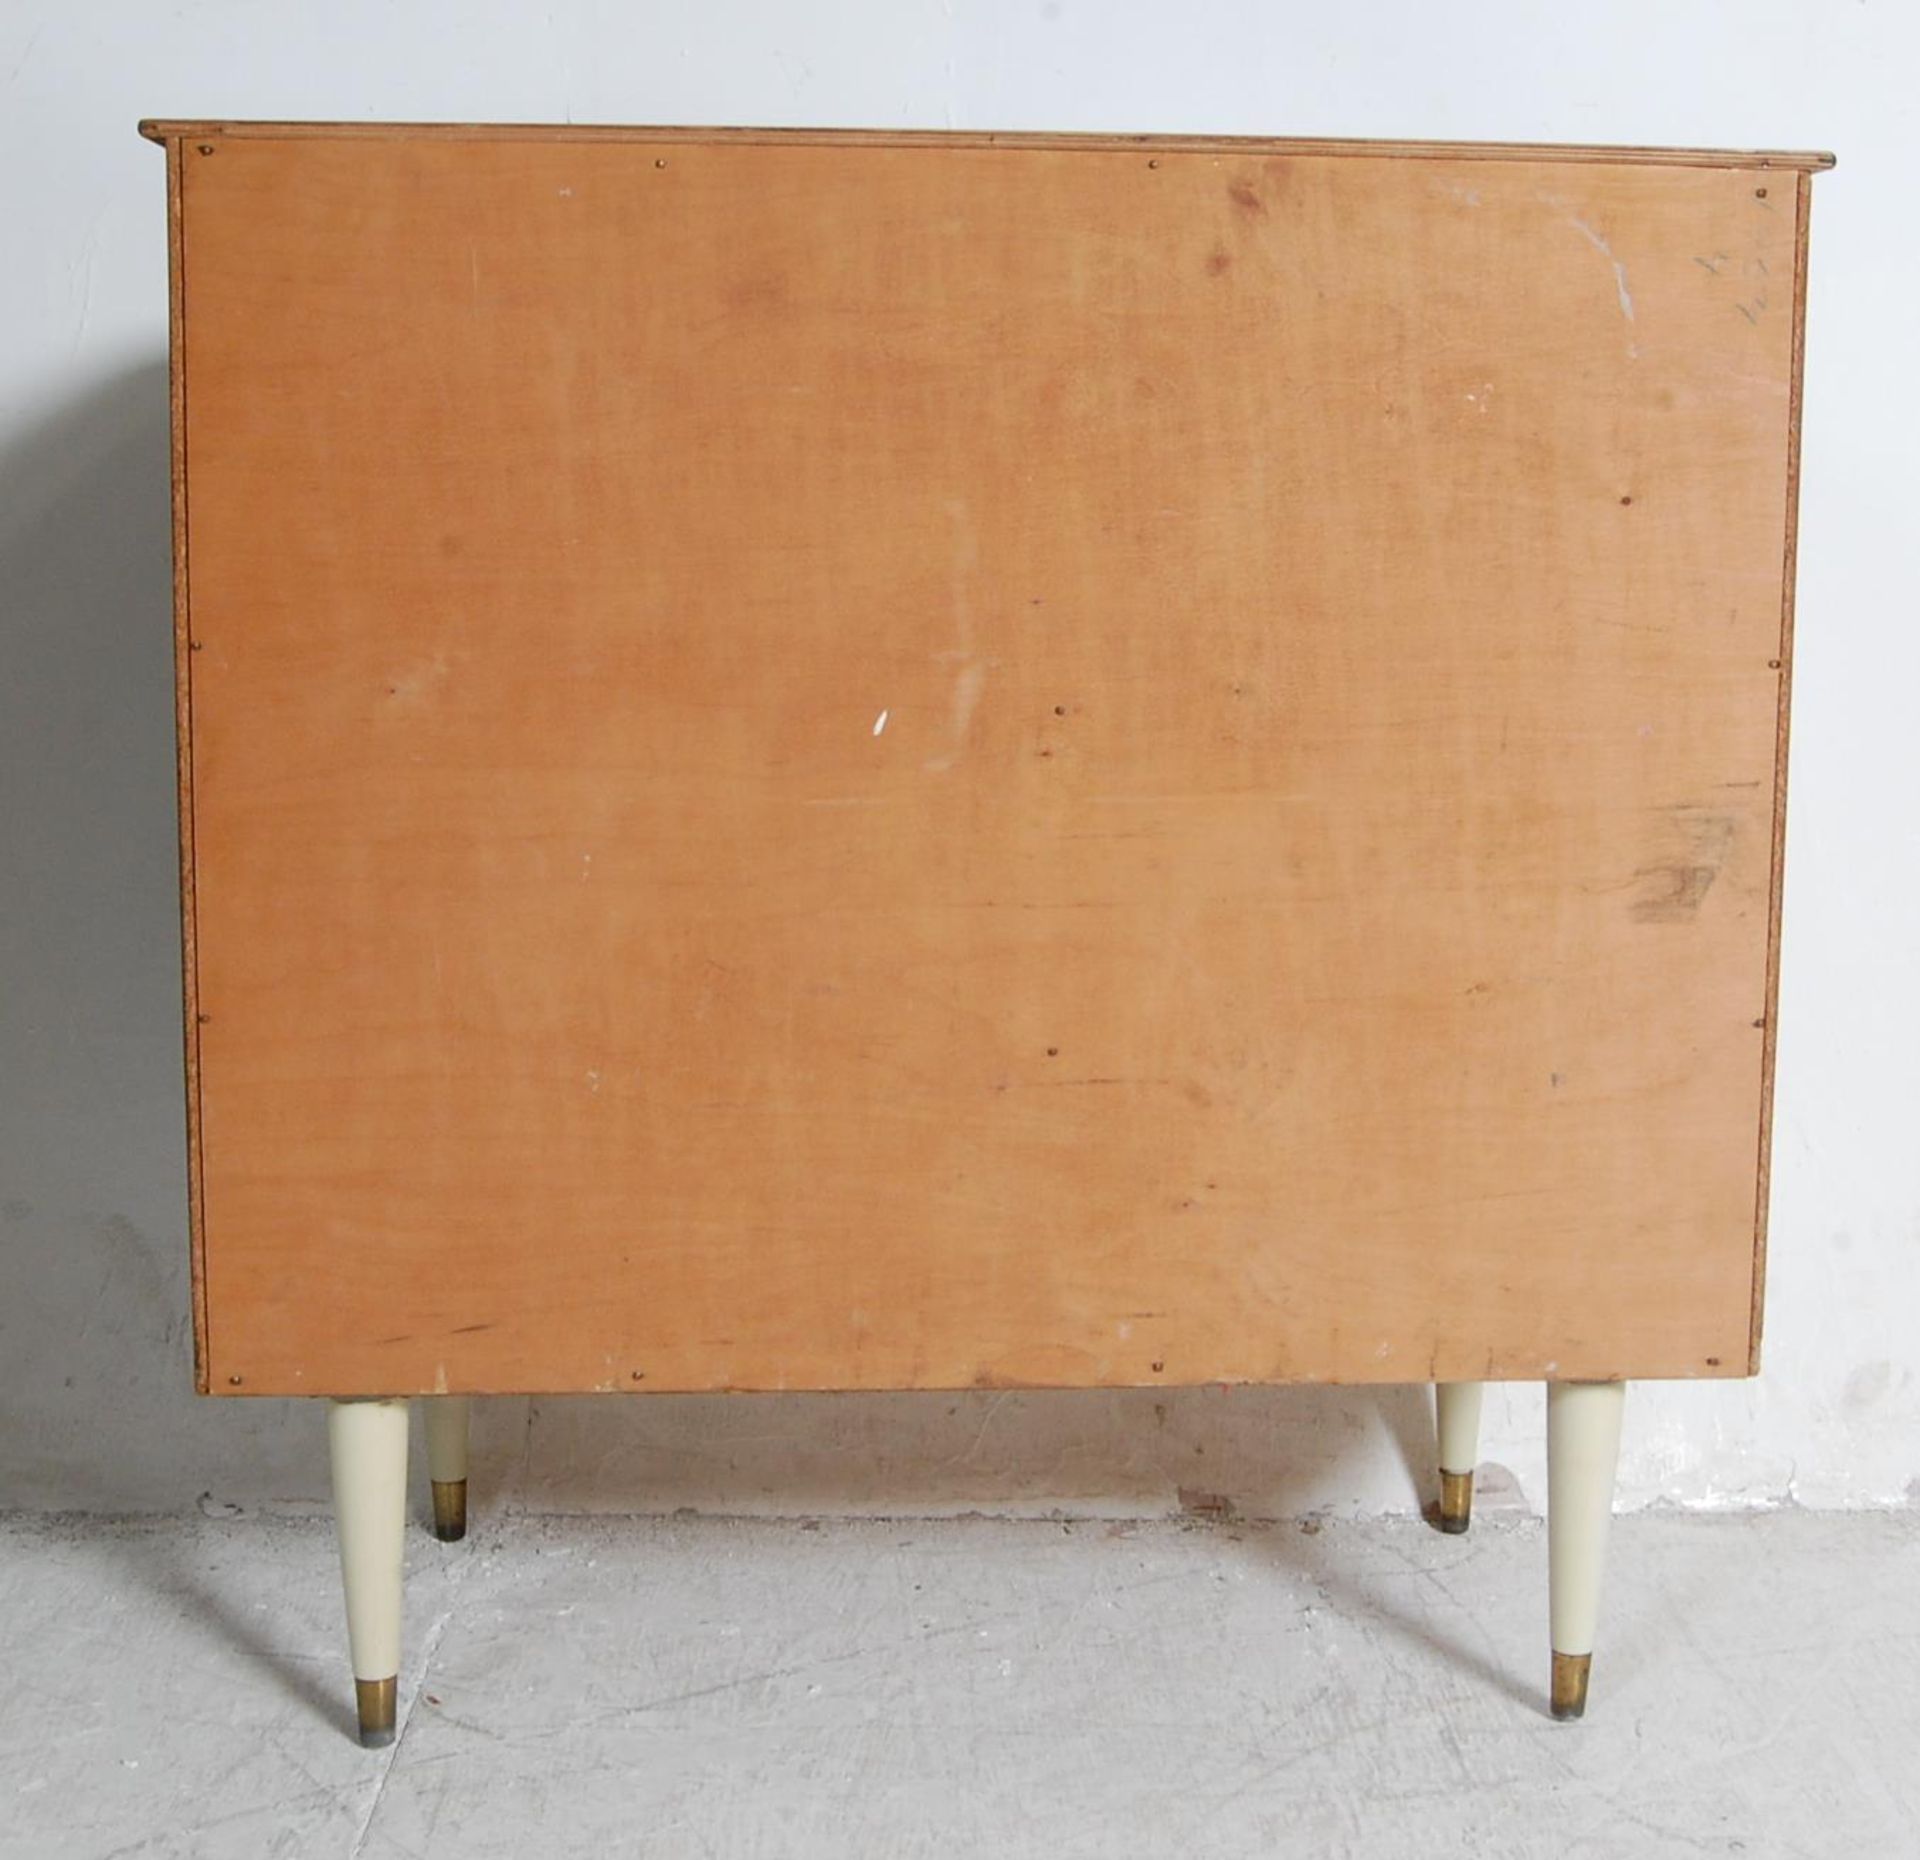 1960’S TEAK WOOD VENEER CHEST OF DRAWERS BY AVALON - Image 7 of 7